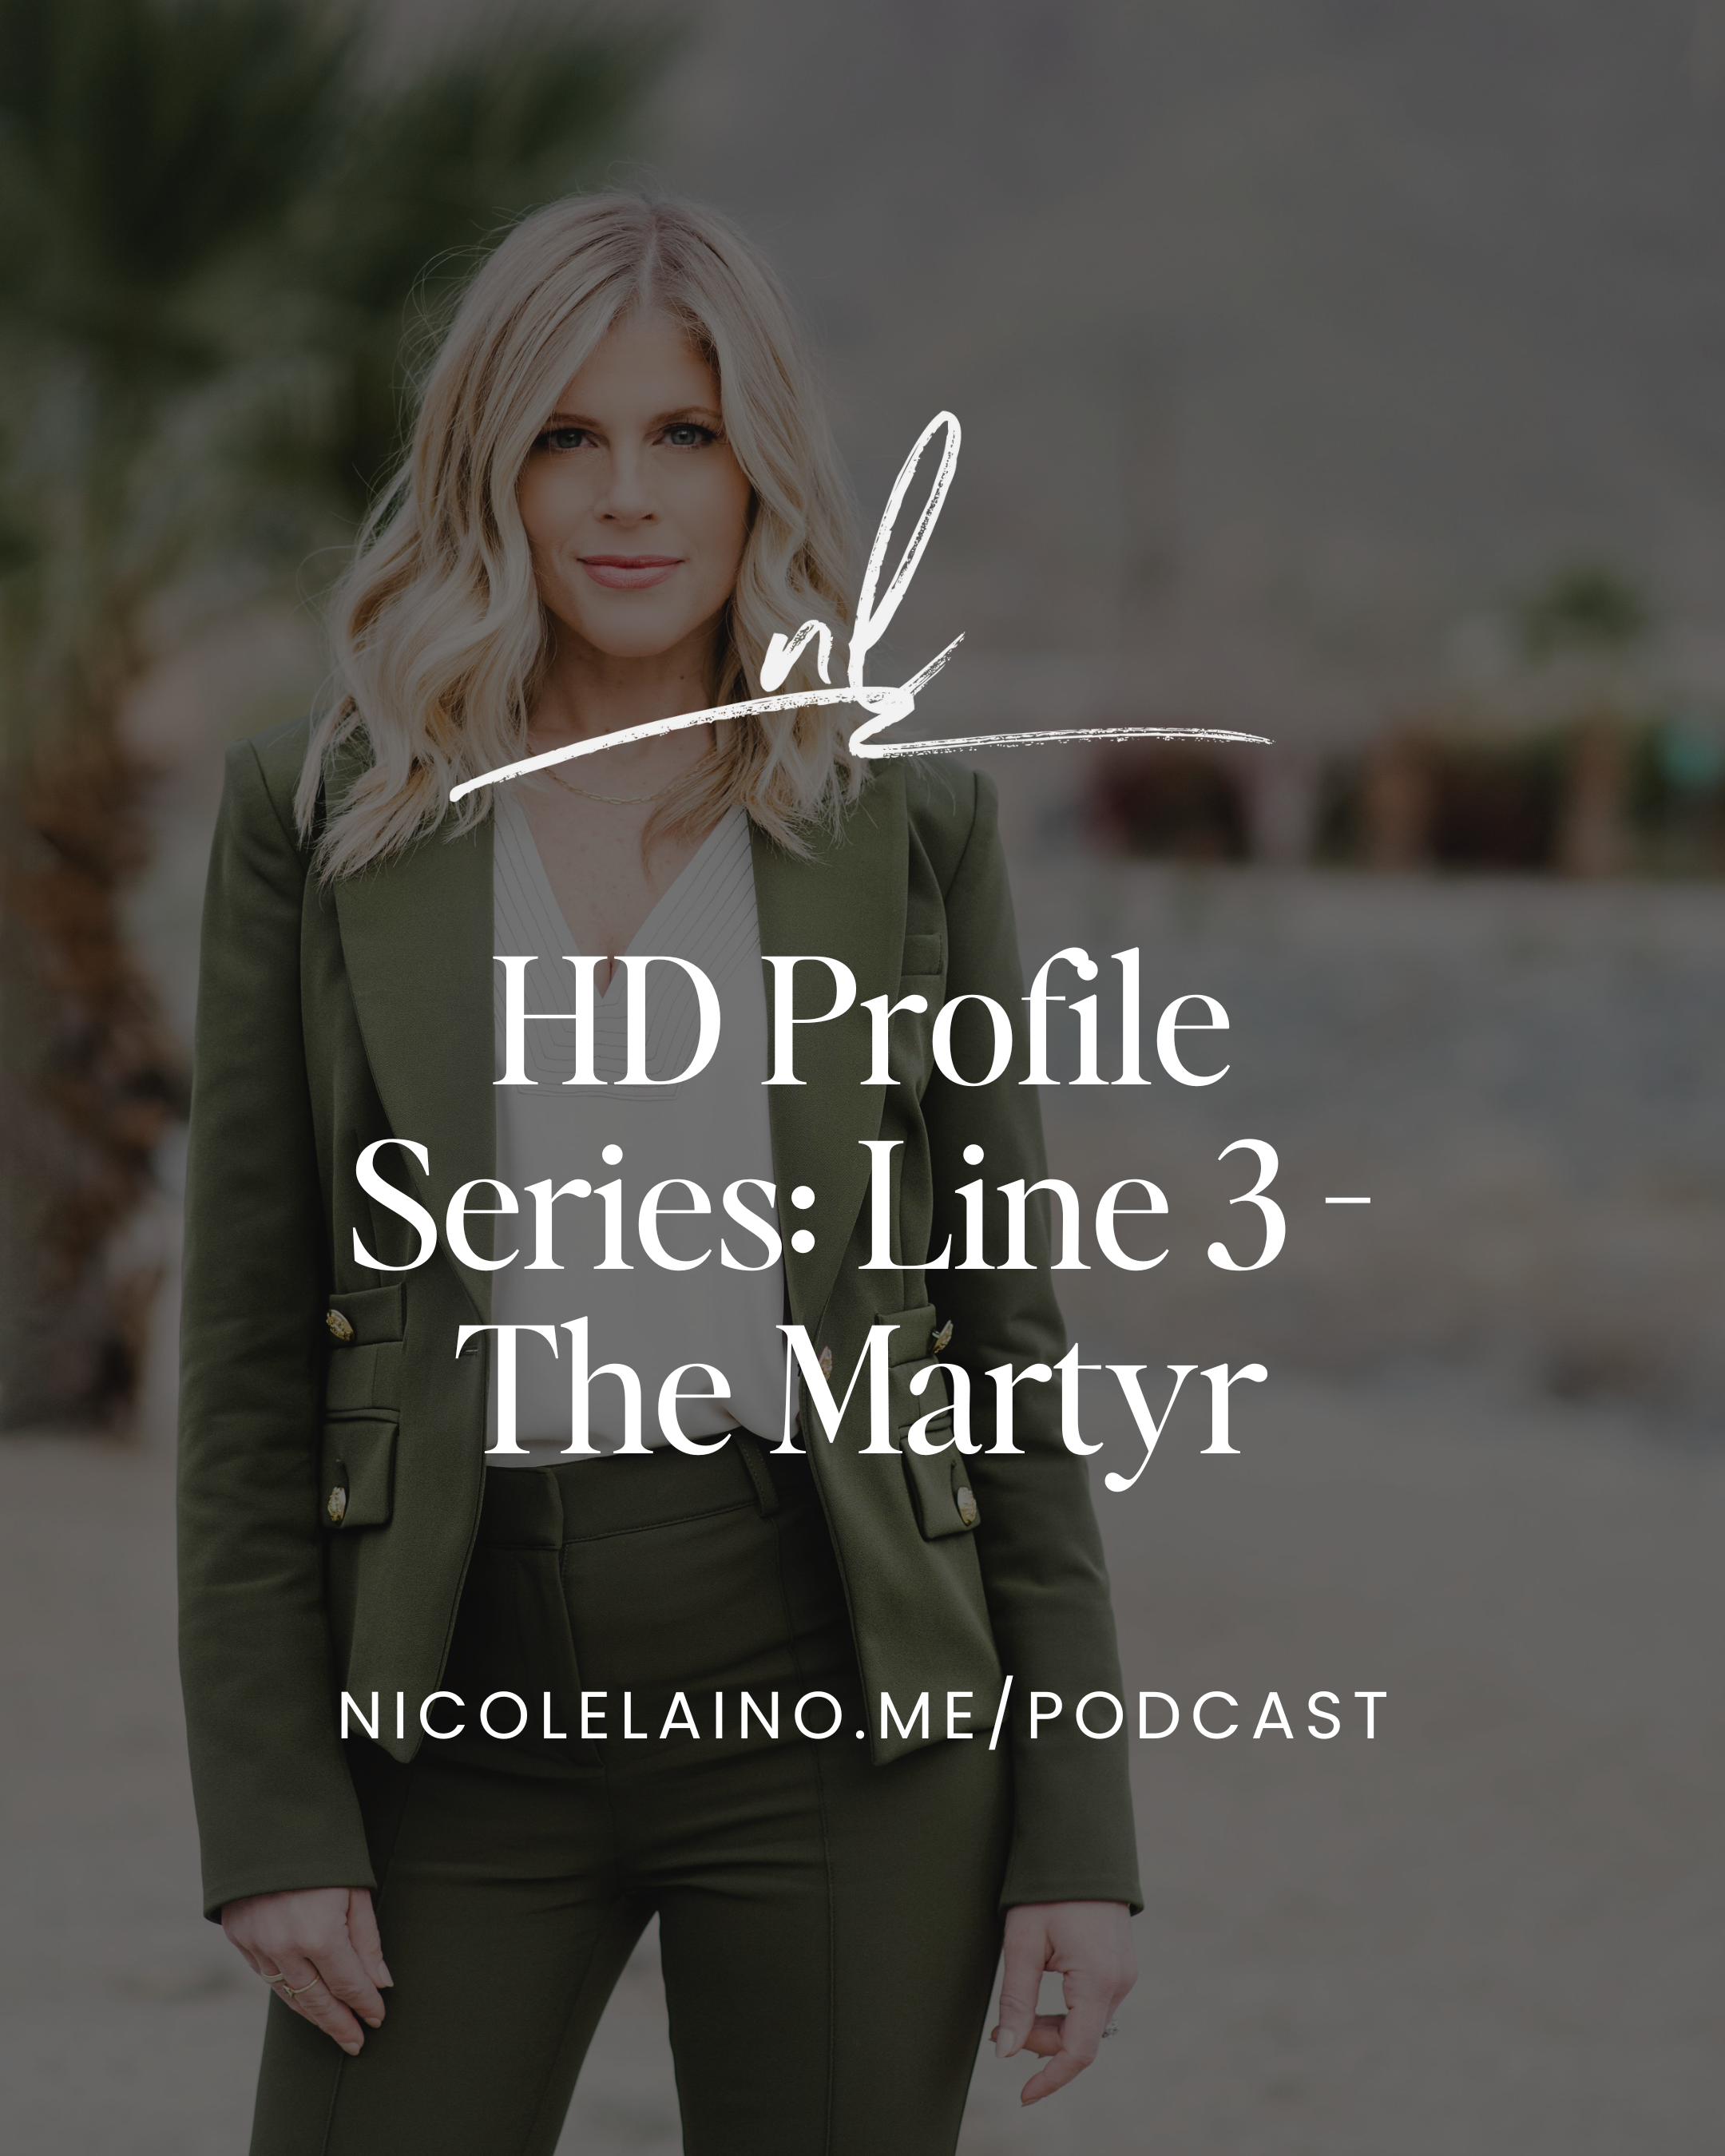 HD Profile Series: Line 3 - The Martyr